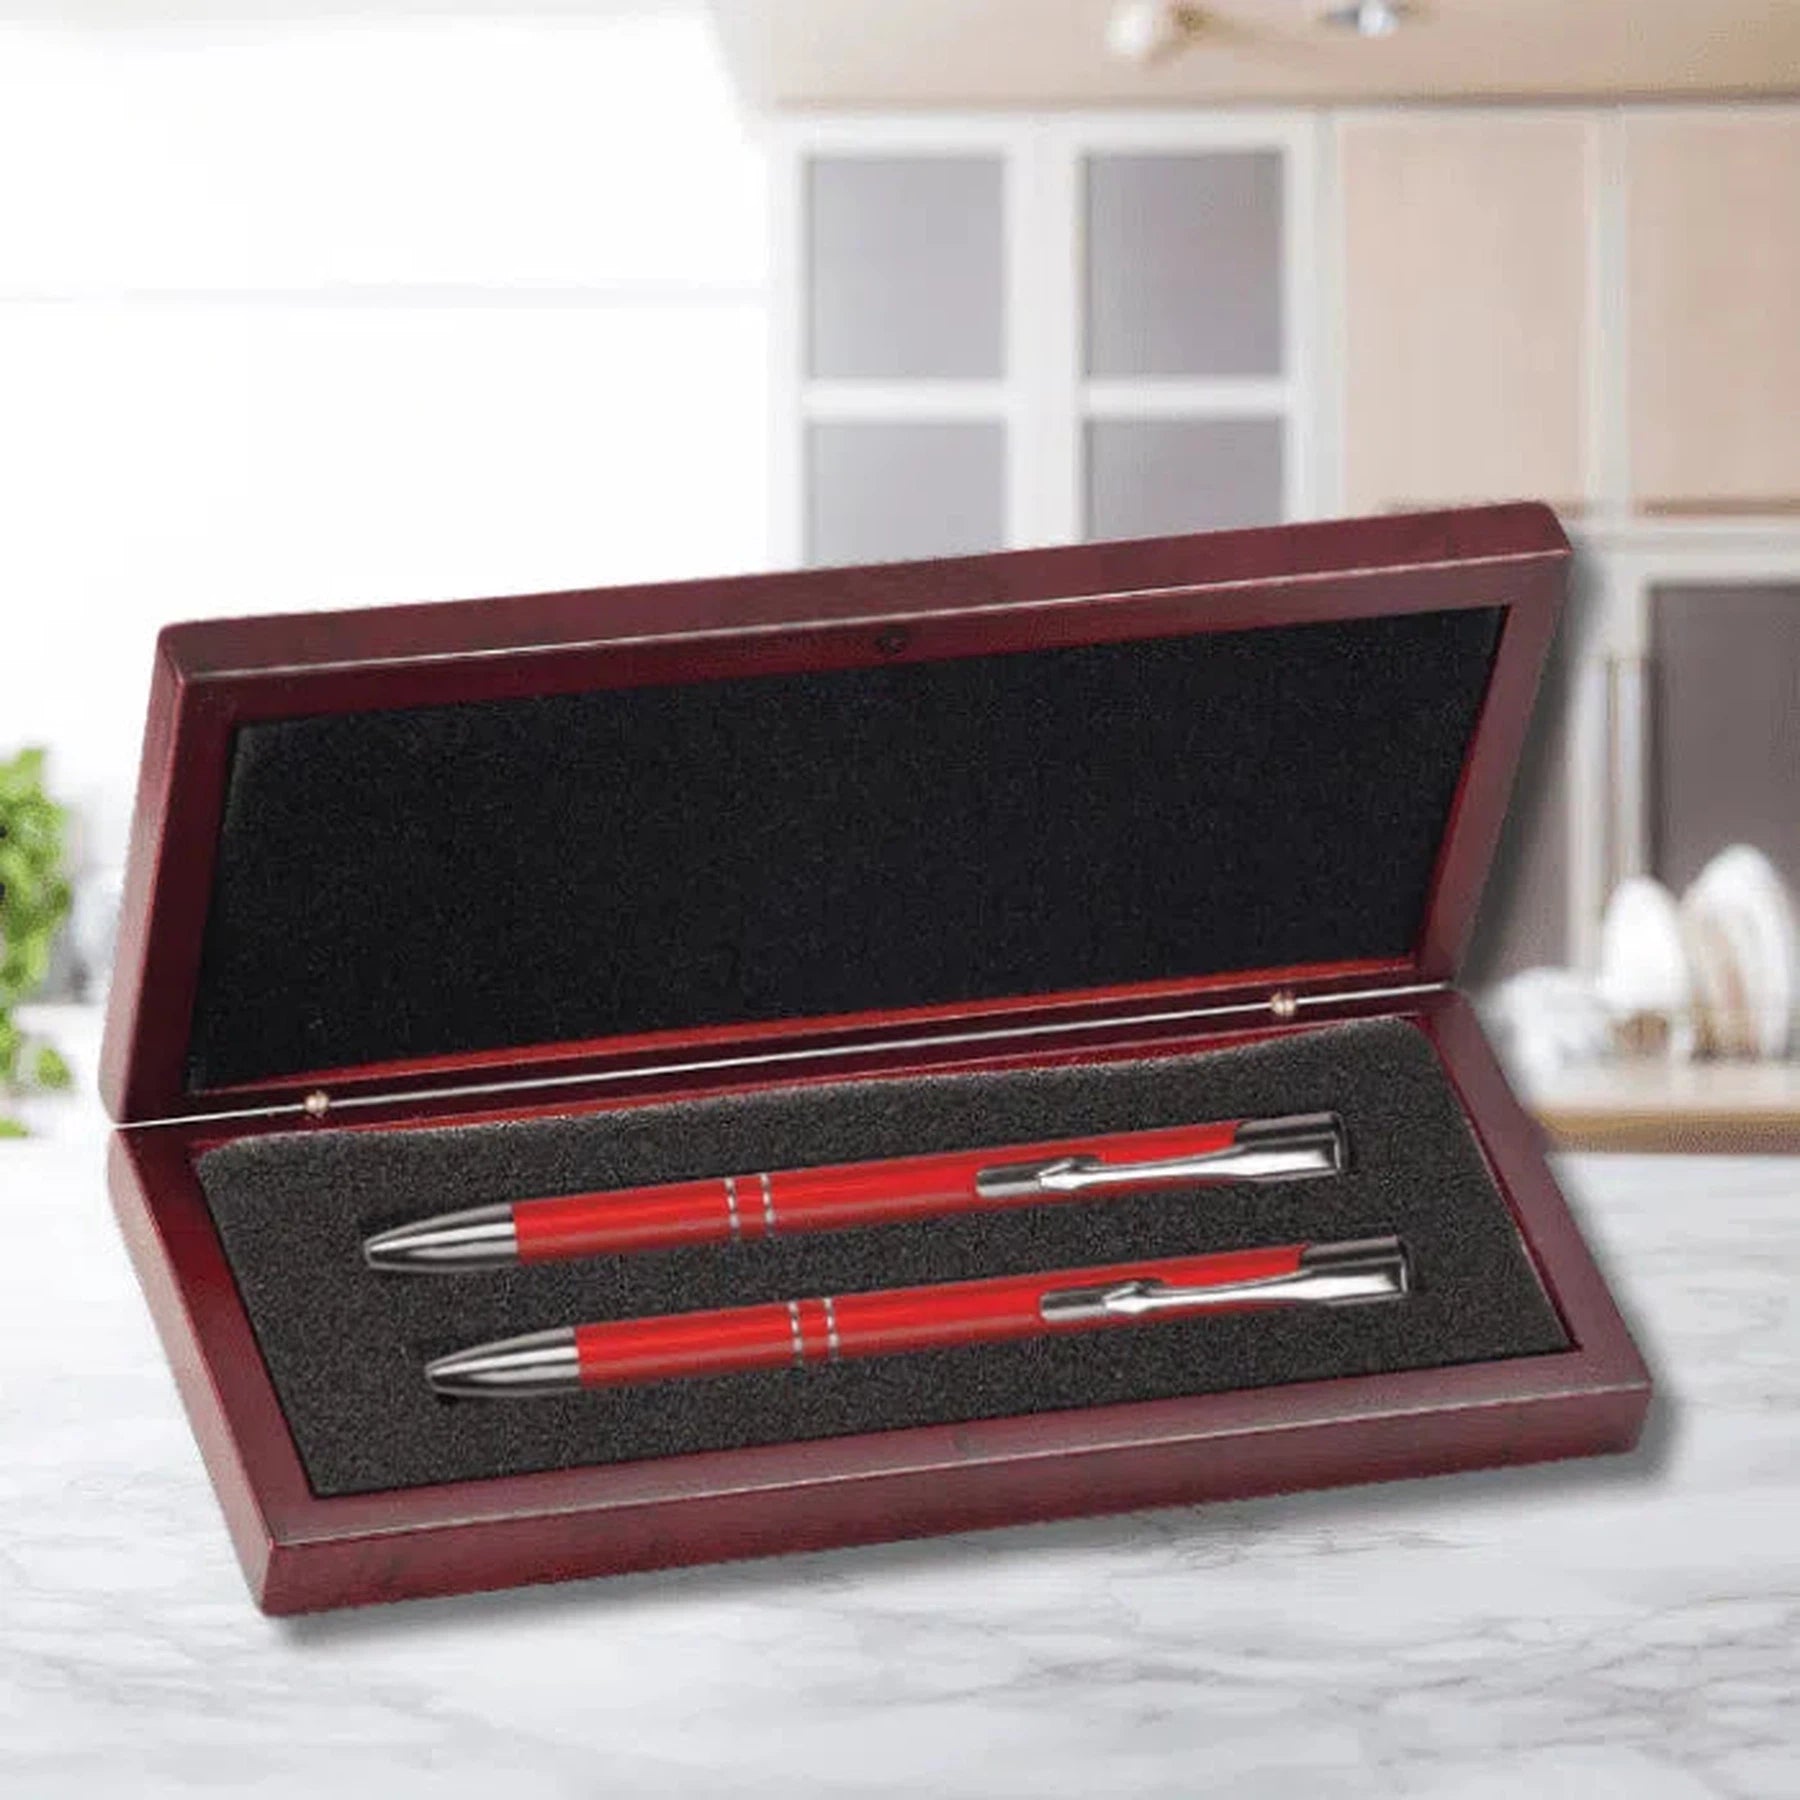 Rosewood Finish Gift Box (Watches, Medals, Pens or Jewelry)